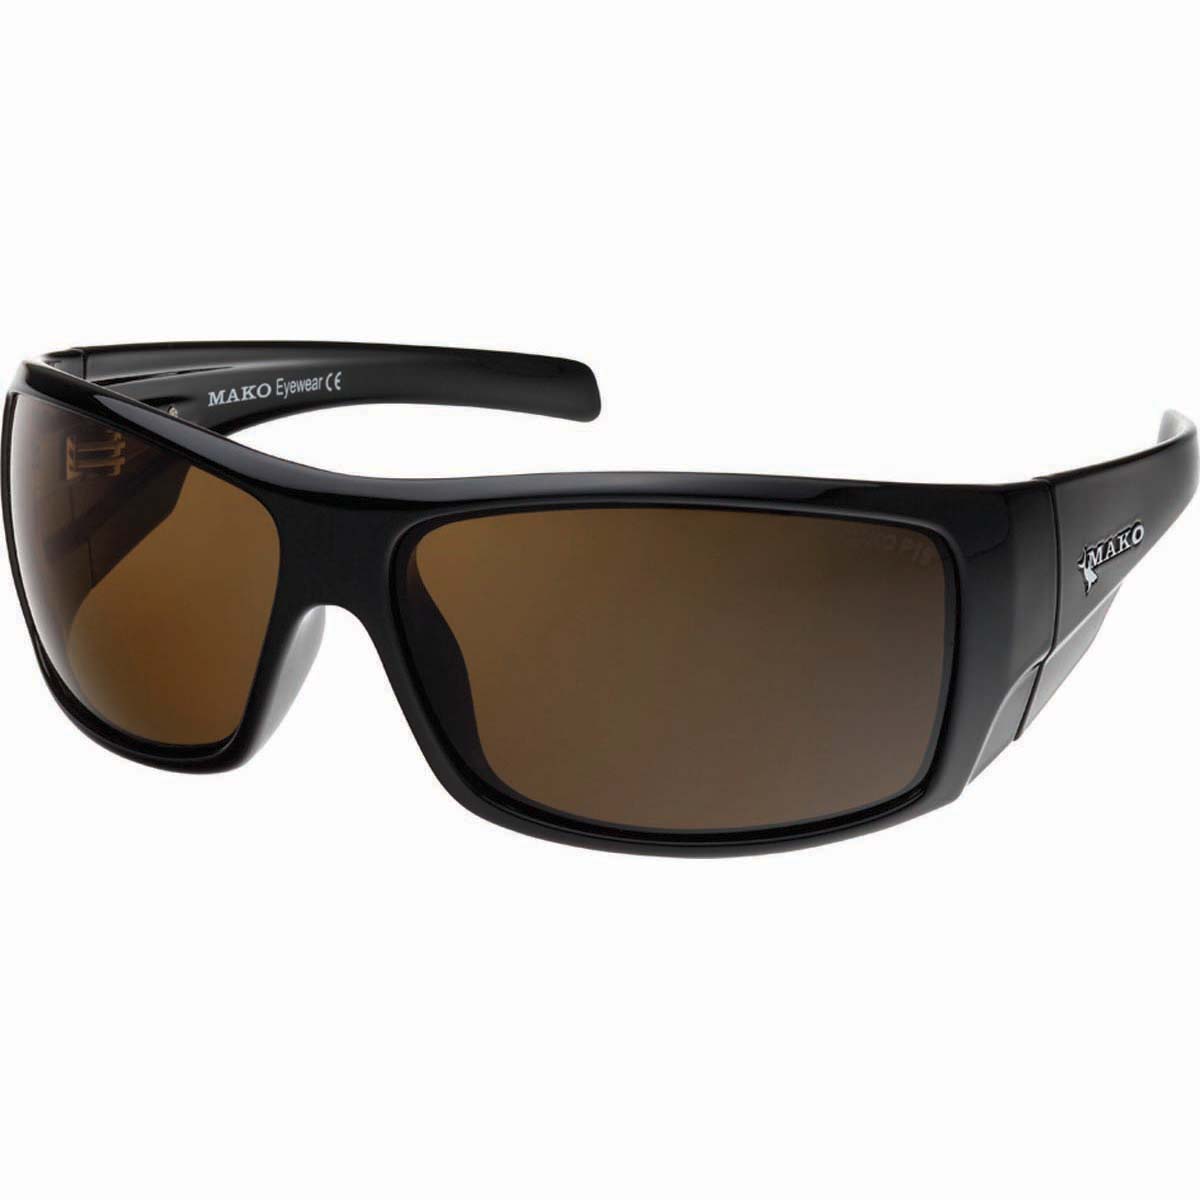 MAKO Indestructible Polarised Sunglasses with Brown Lens